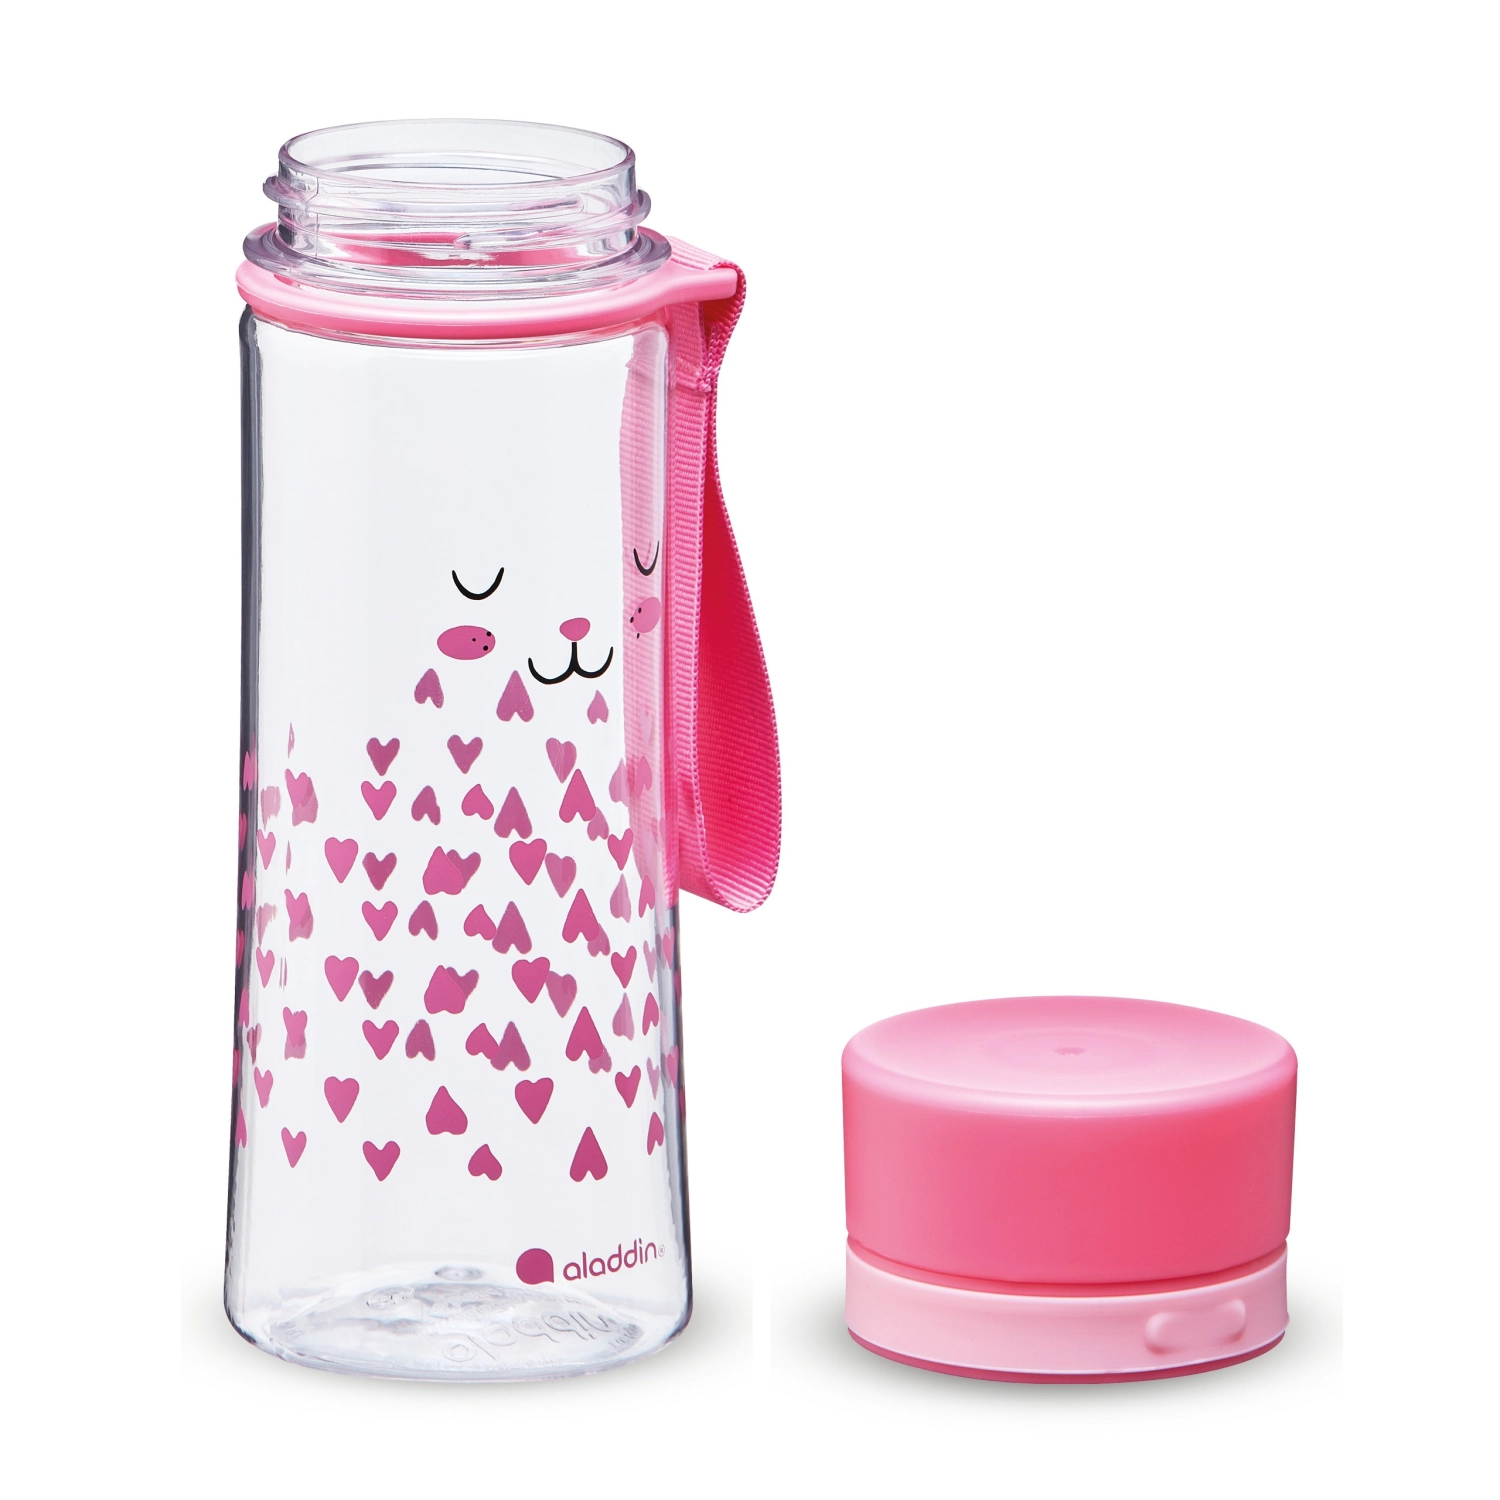 Aladdin my first aveo bunny water bottle for kids 0.35l rose